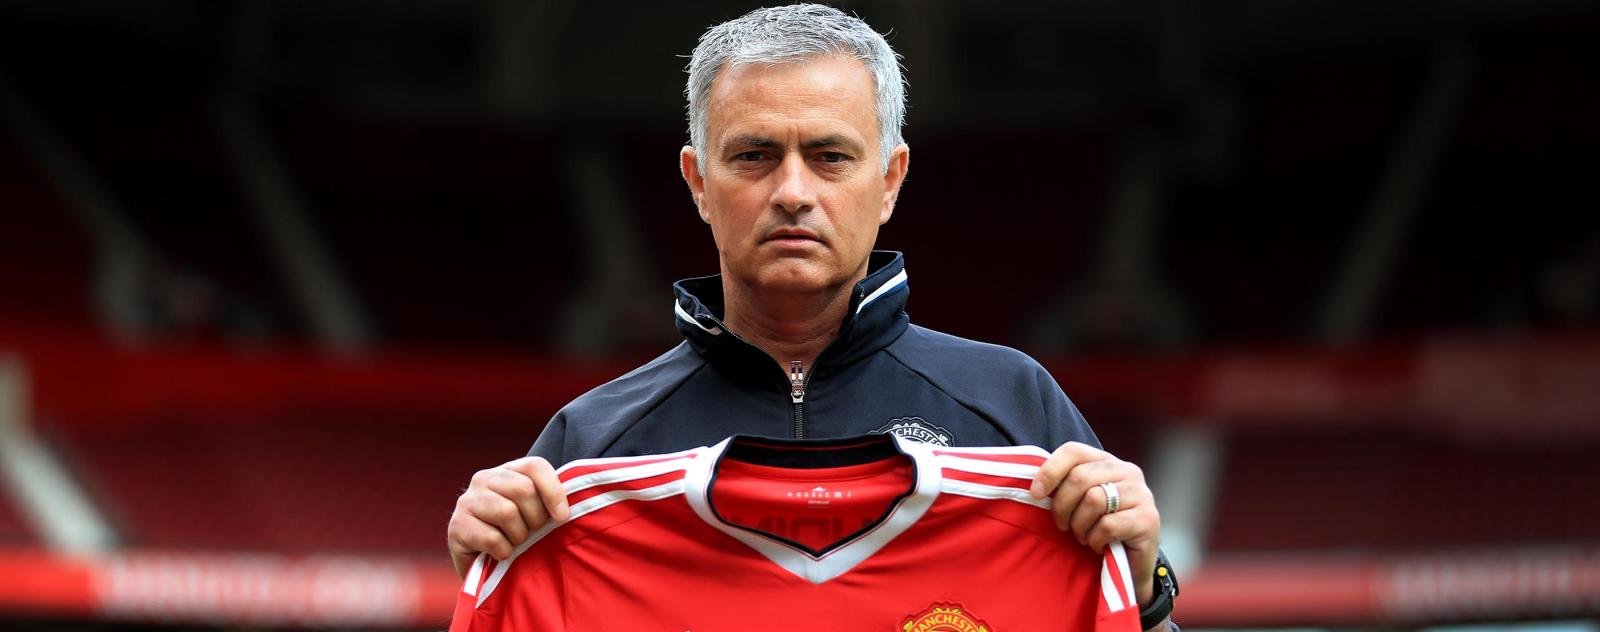 Manchester United set to sign 17-year-old winger on a three-year deal